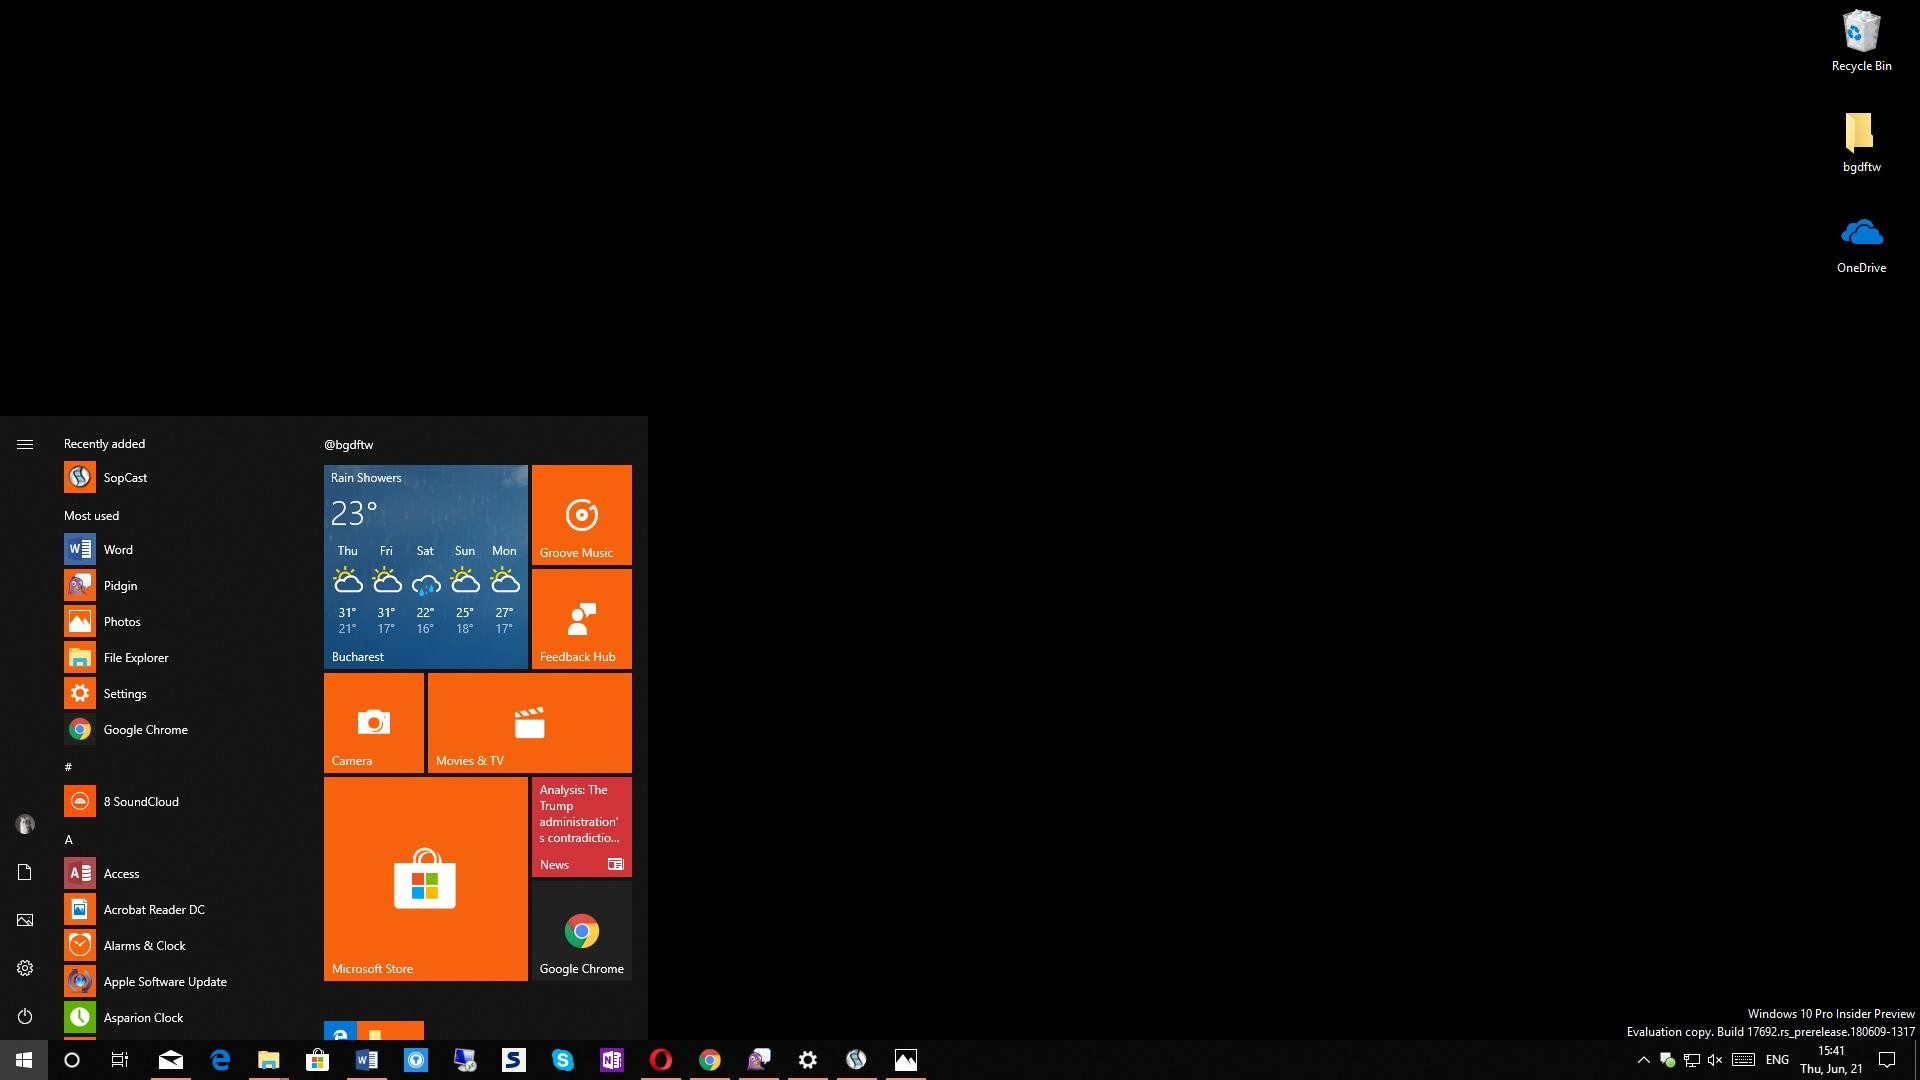 How to Completely Remove the Desktop Wallpaper in Windows 10